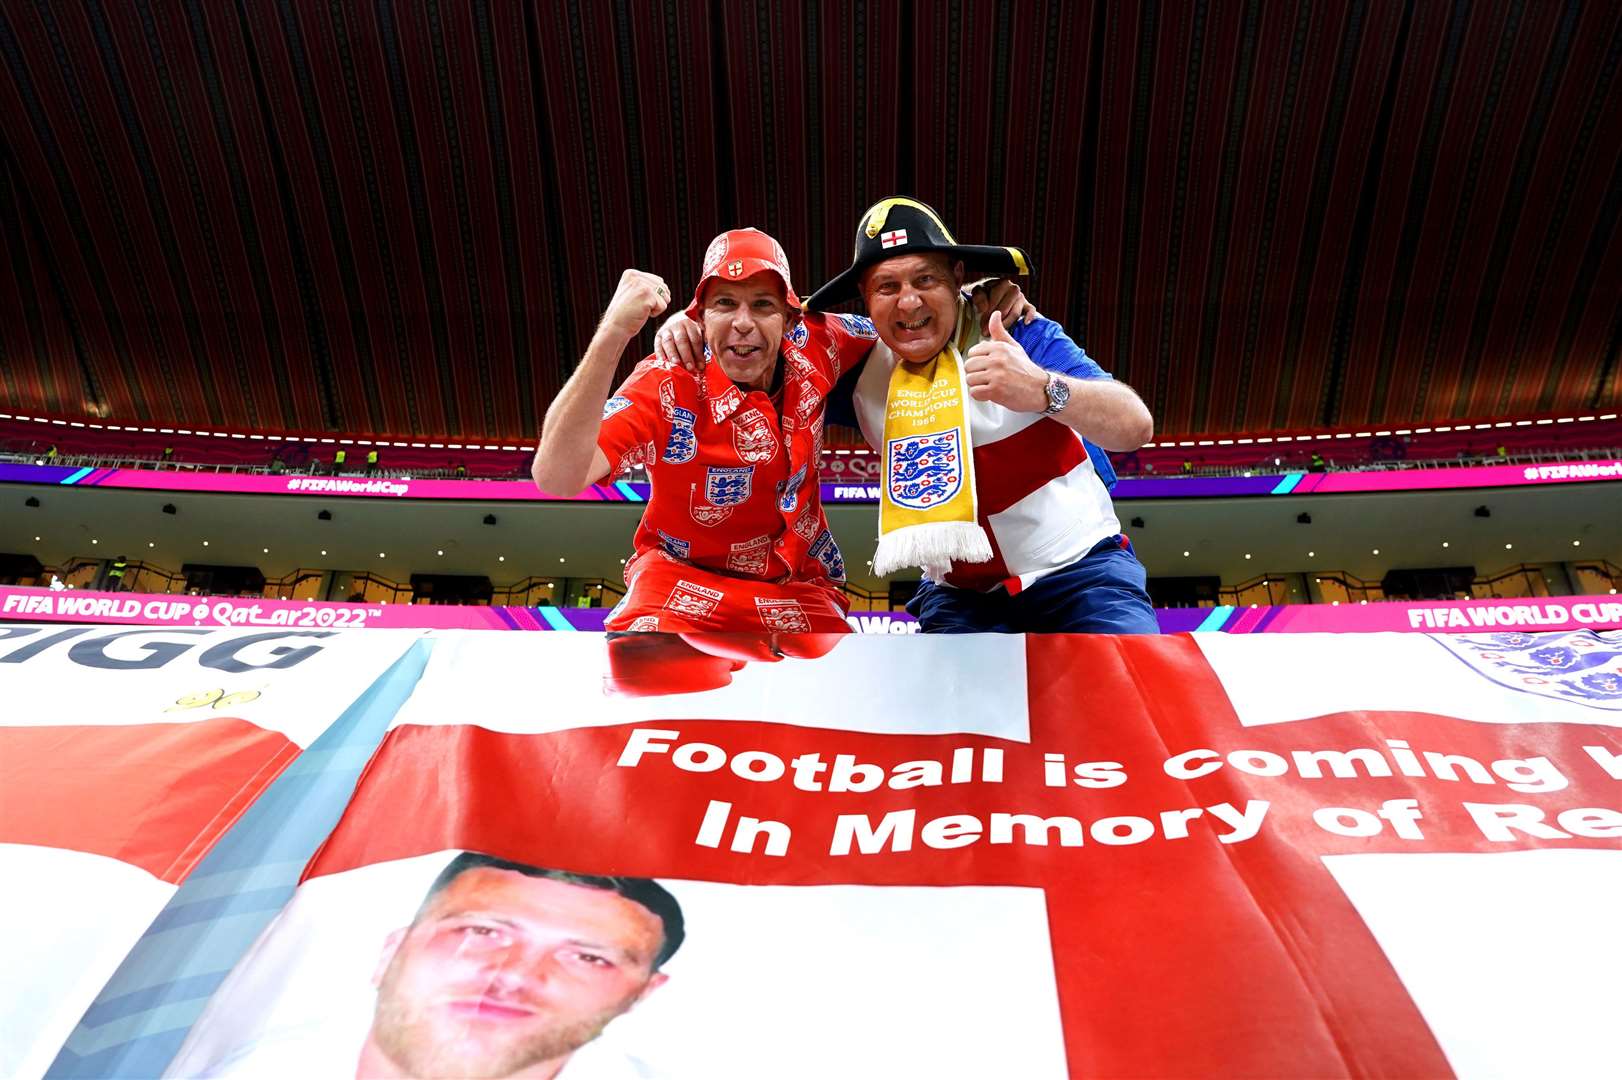 England fans in the stands ahead of the match between England and Senegal at the Al-Bayt Stadium in Qatar (Martin Rickett/PA)